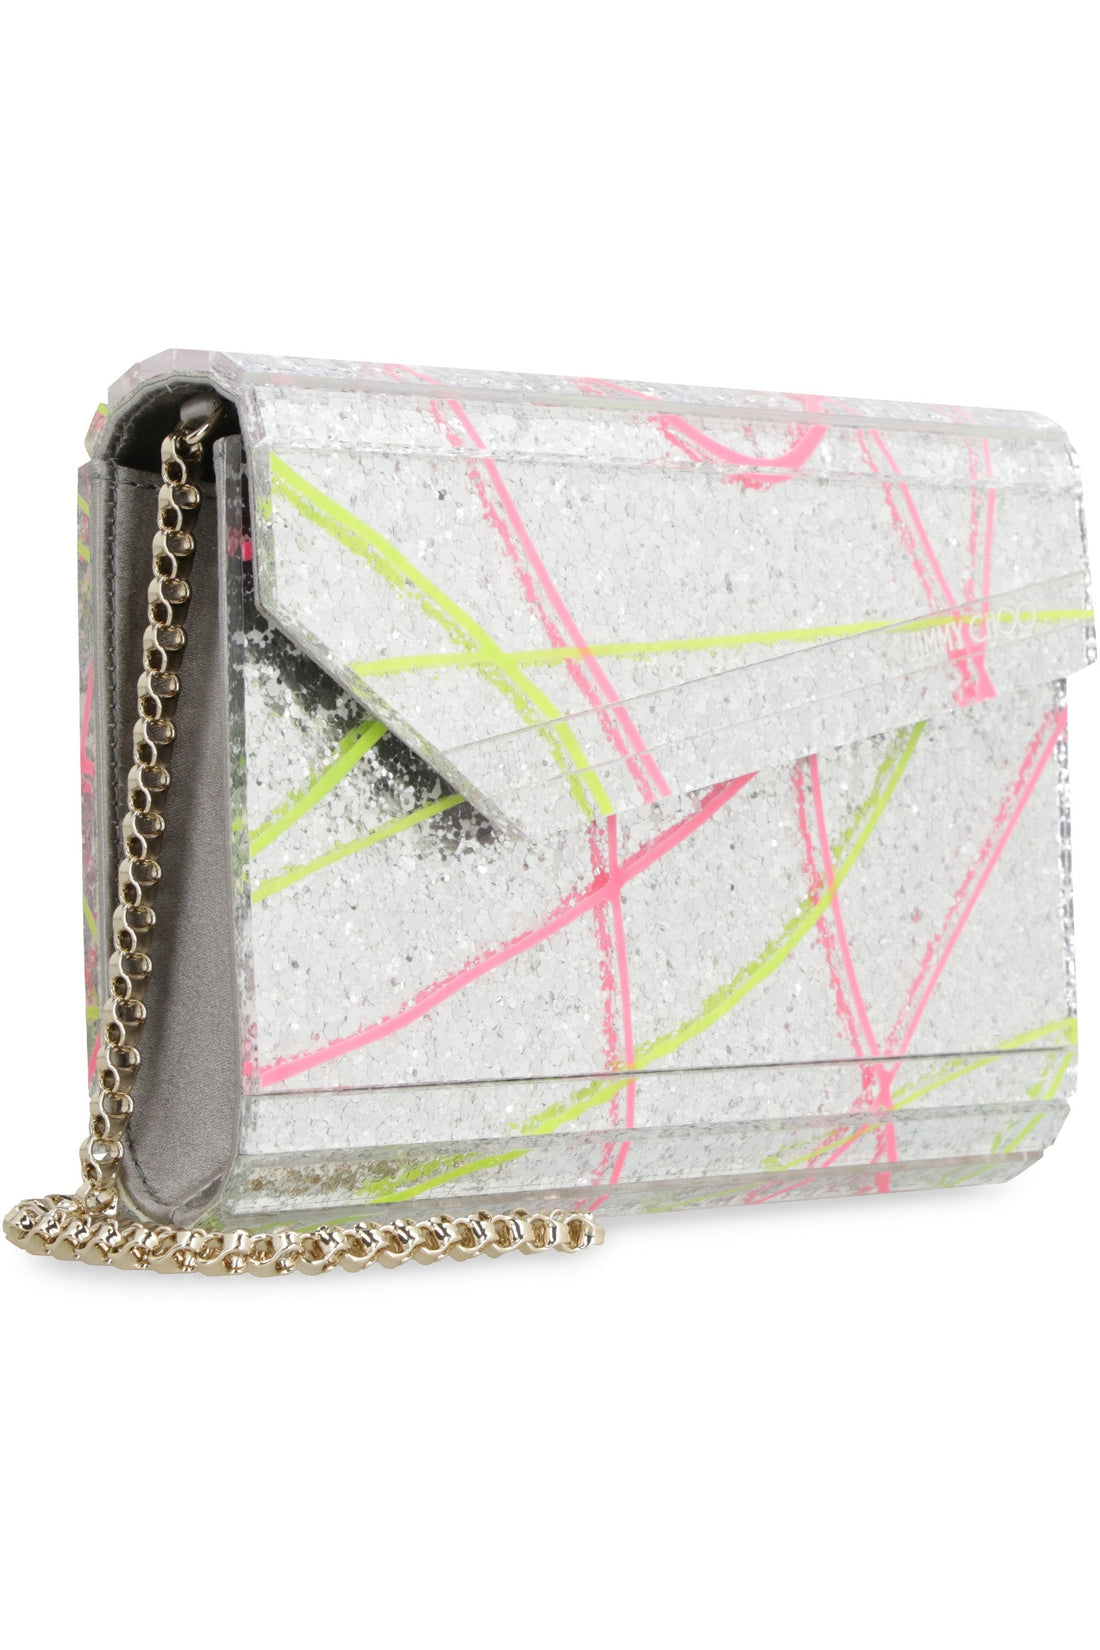 Jimmy Choo-OUTLET-SALE-Candy acrylic box clutch-ARCHIVIST